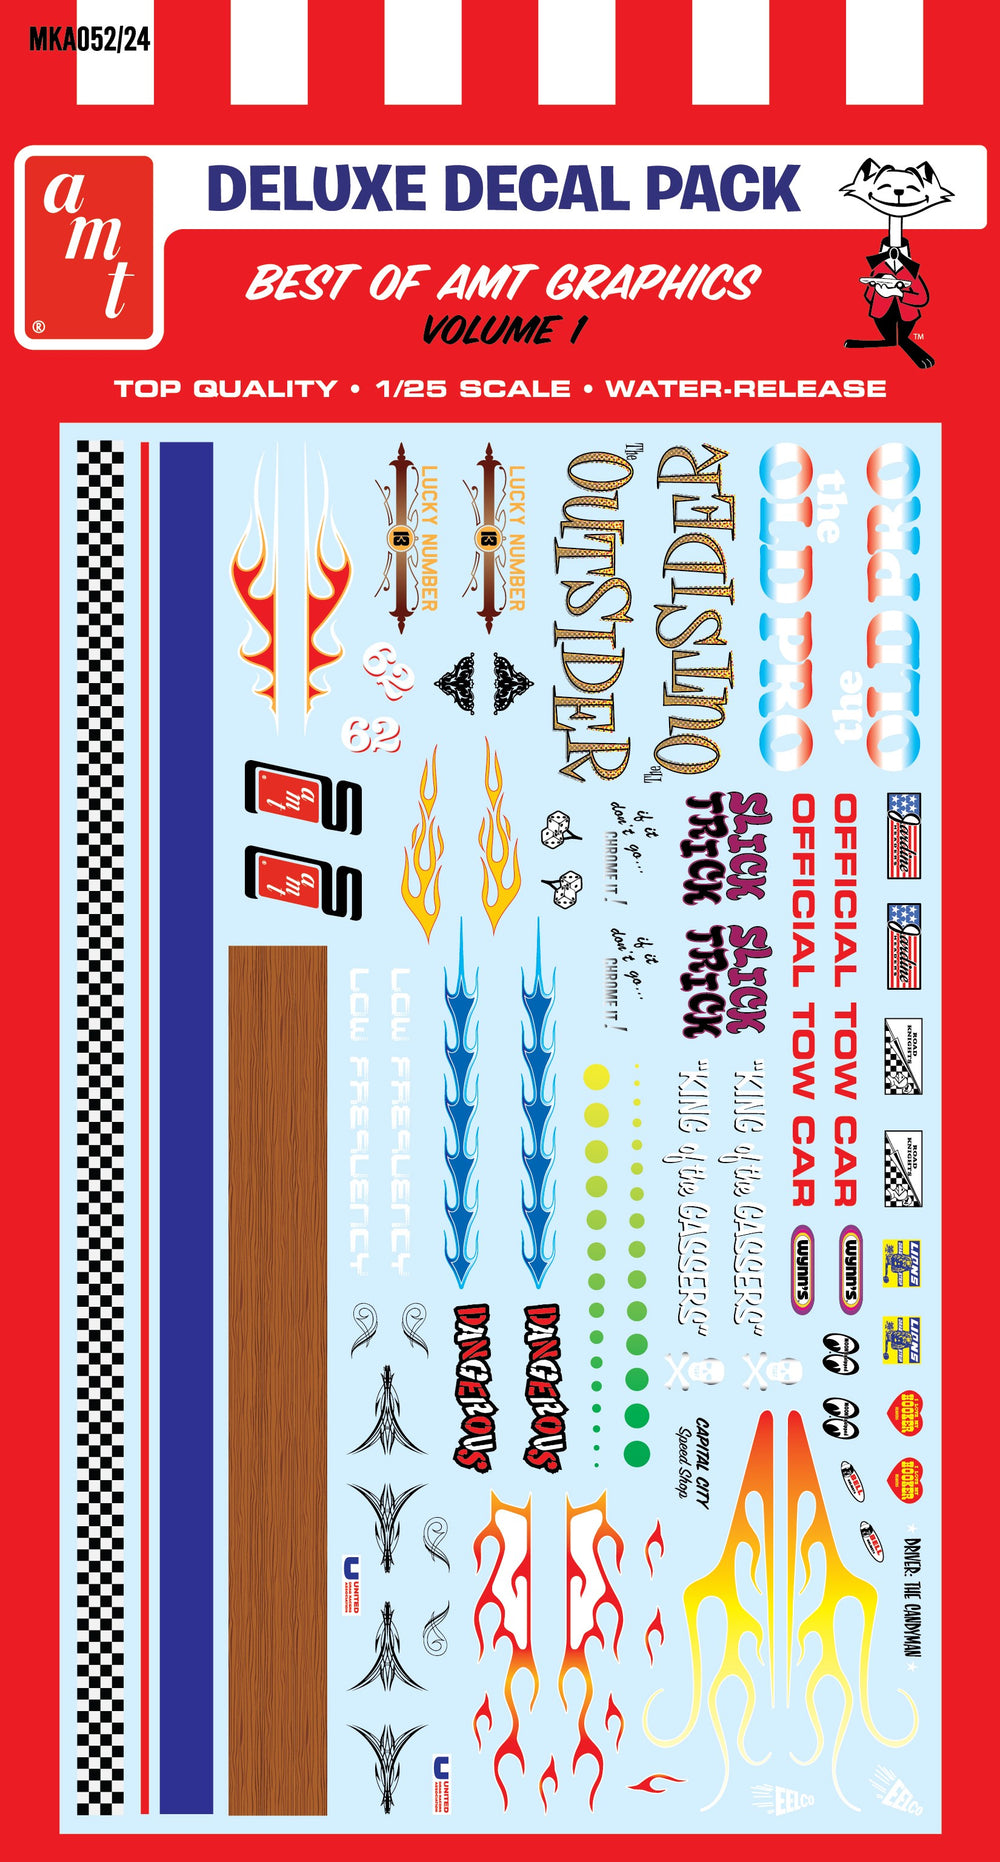 Deluxe Decal Pack: Best of AMT Graphics Volume 1